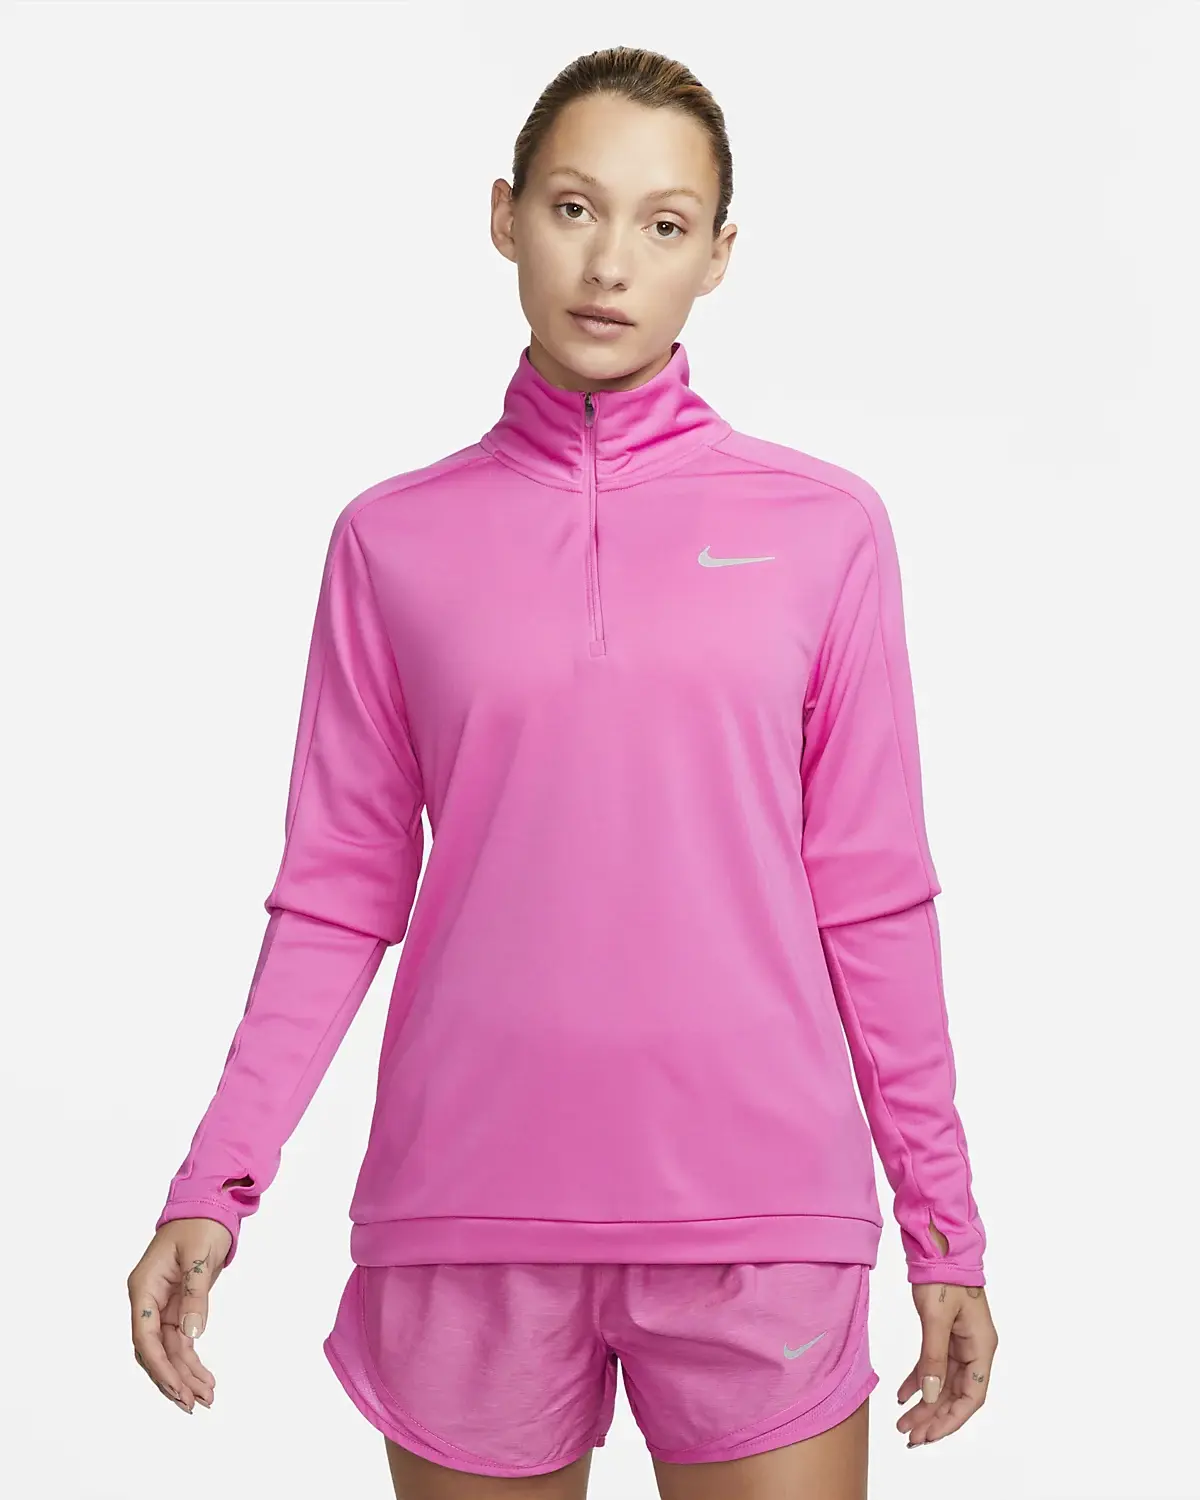 Nike Dri-FIT Pacer. 1